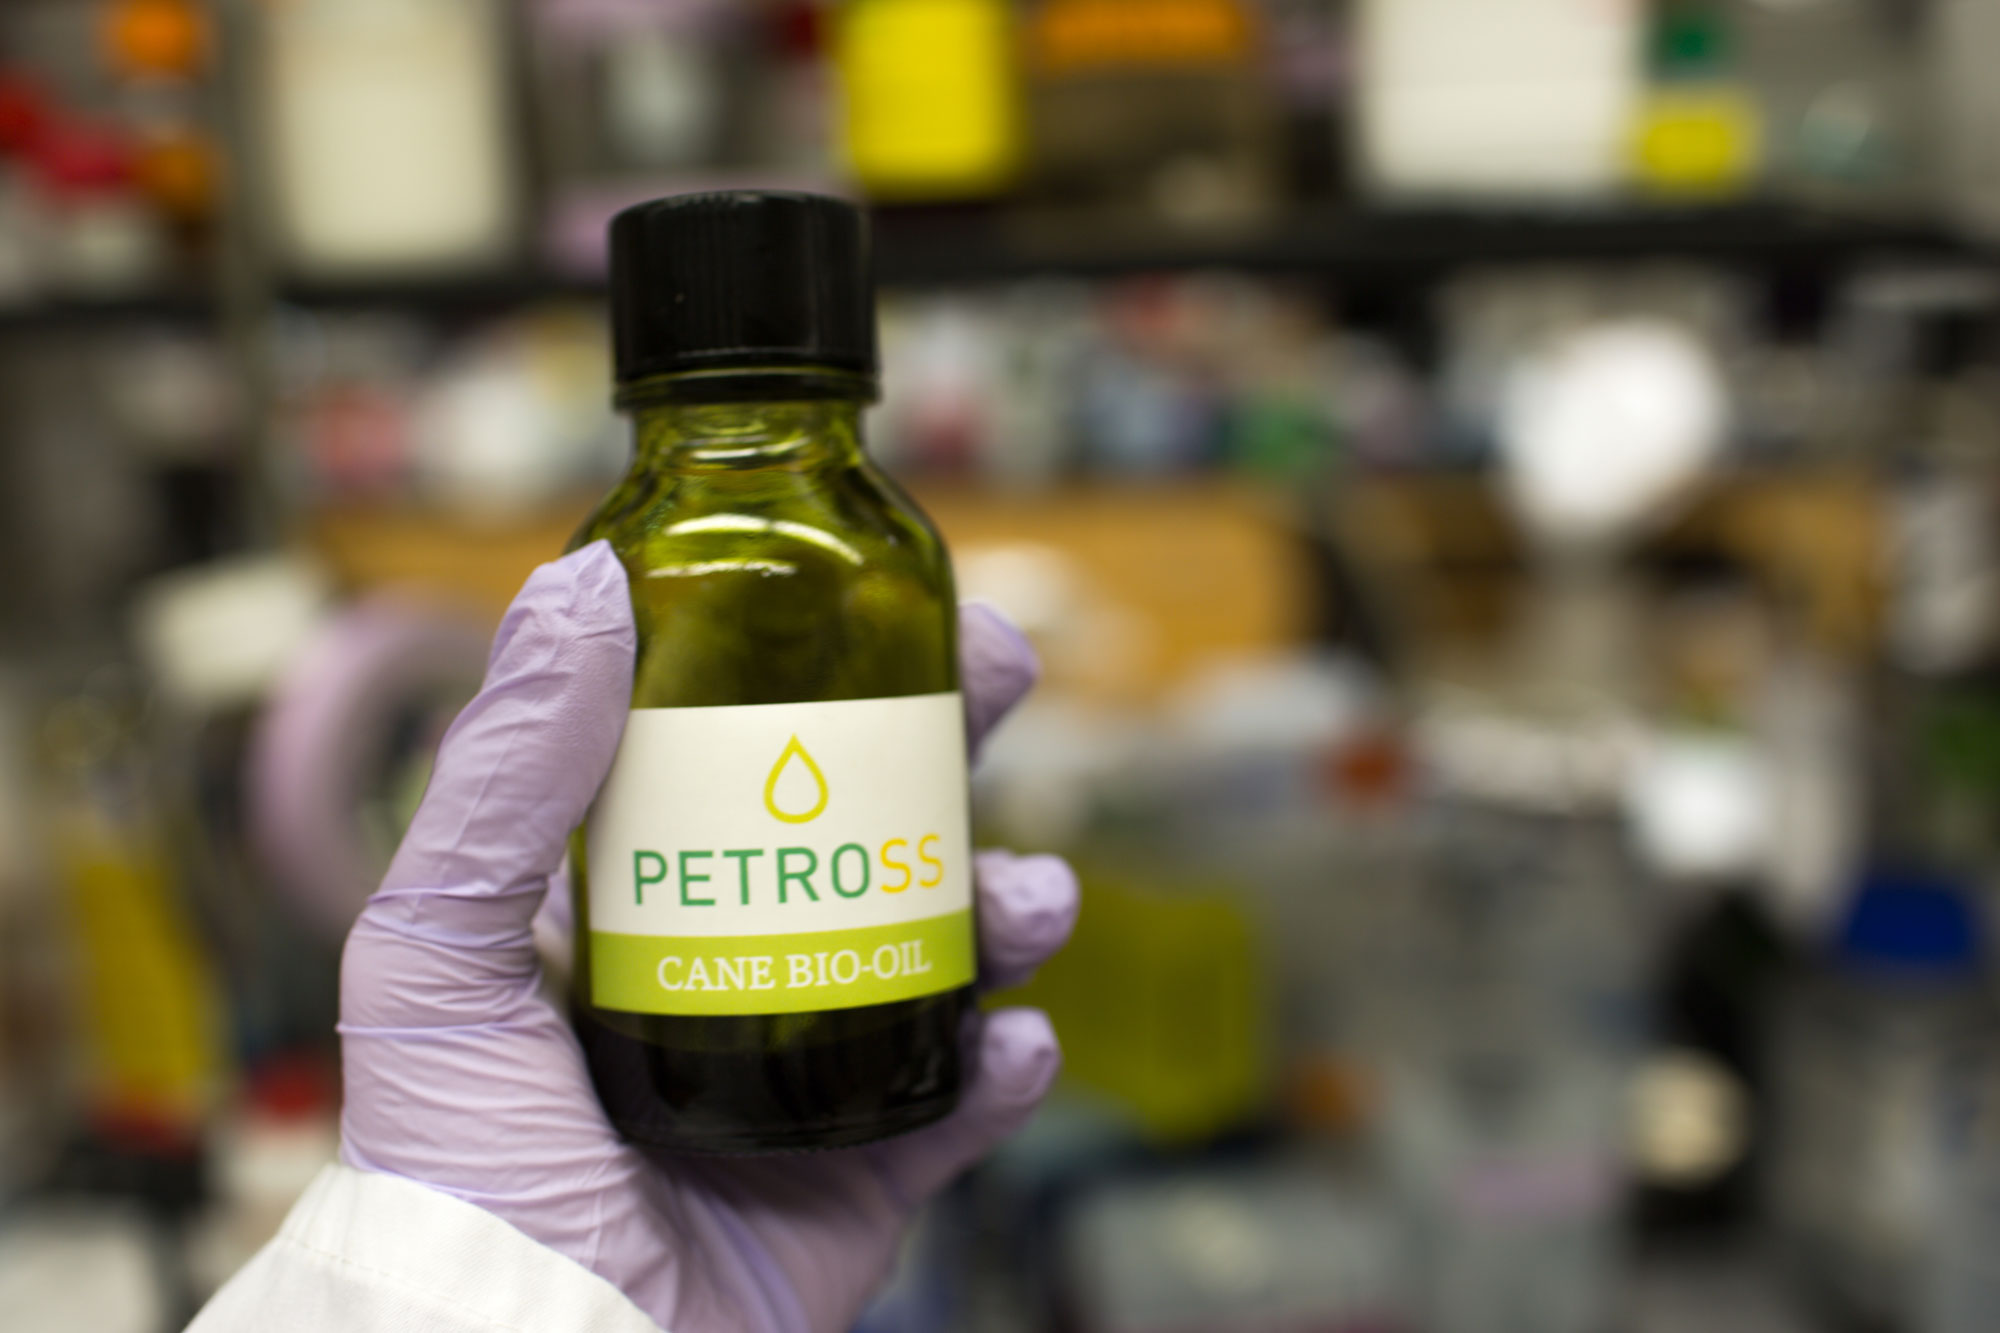 Photograph of gloved hand holding a small bottle made of green glass with a black top. The bottle is labeled "PETROSS CANE BIO-OIL."